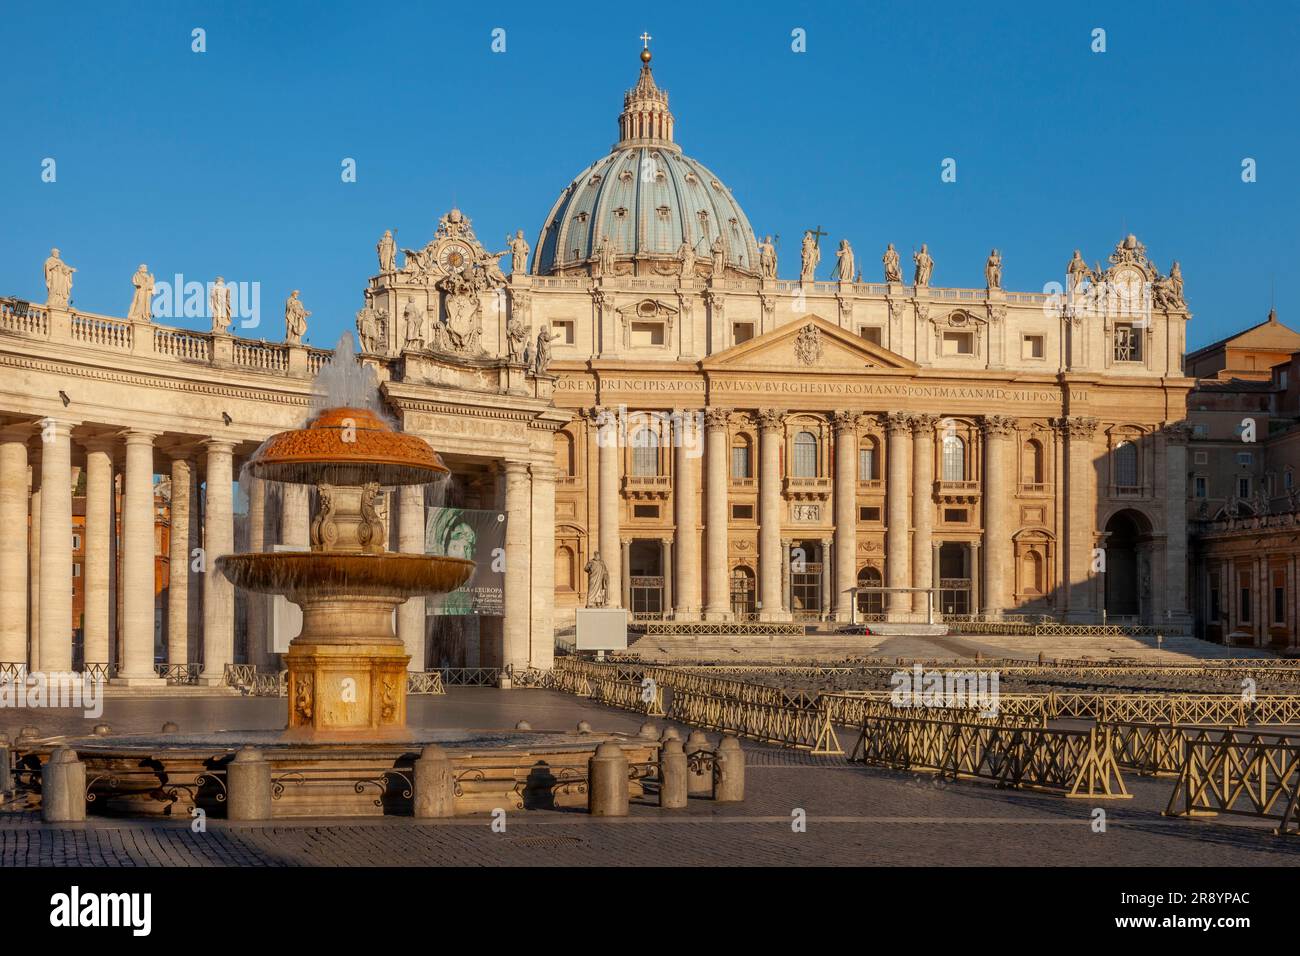 Early morning in Piazza San Pietro, Vatican City, Rome, Italy Stock Photo